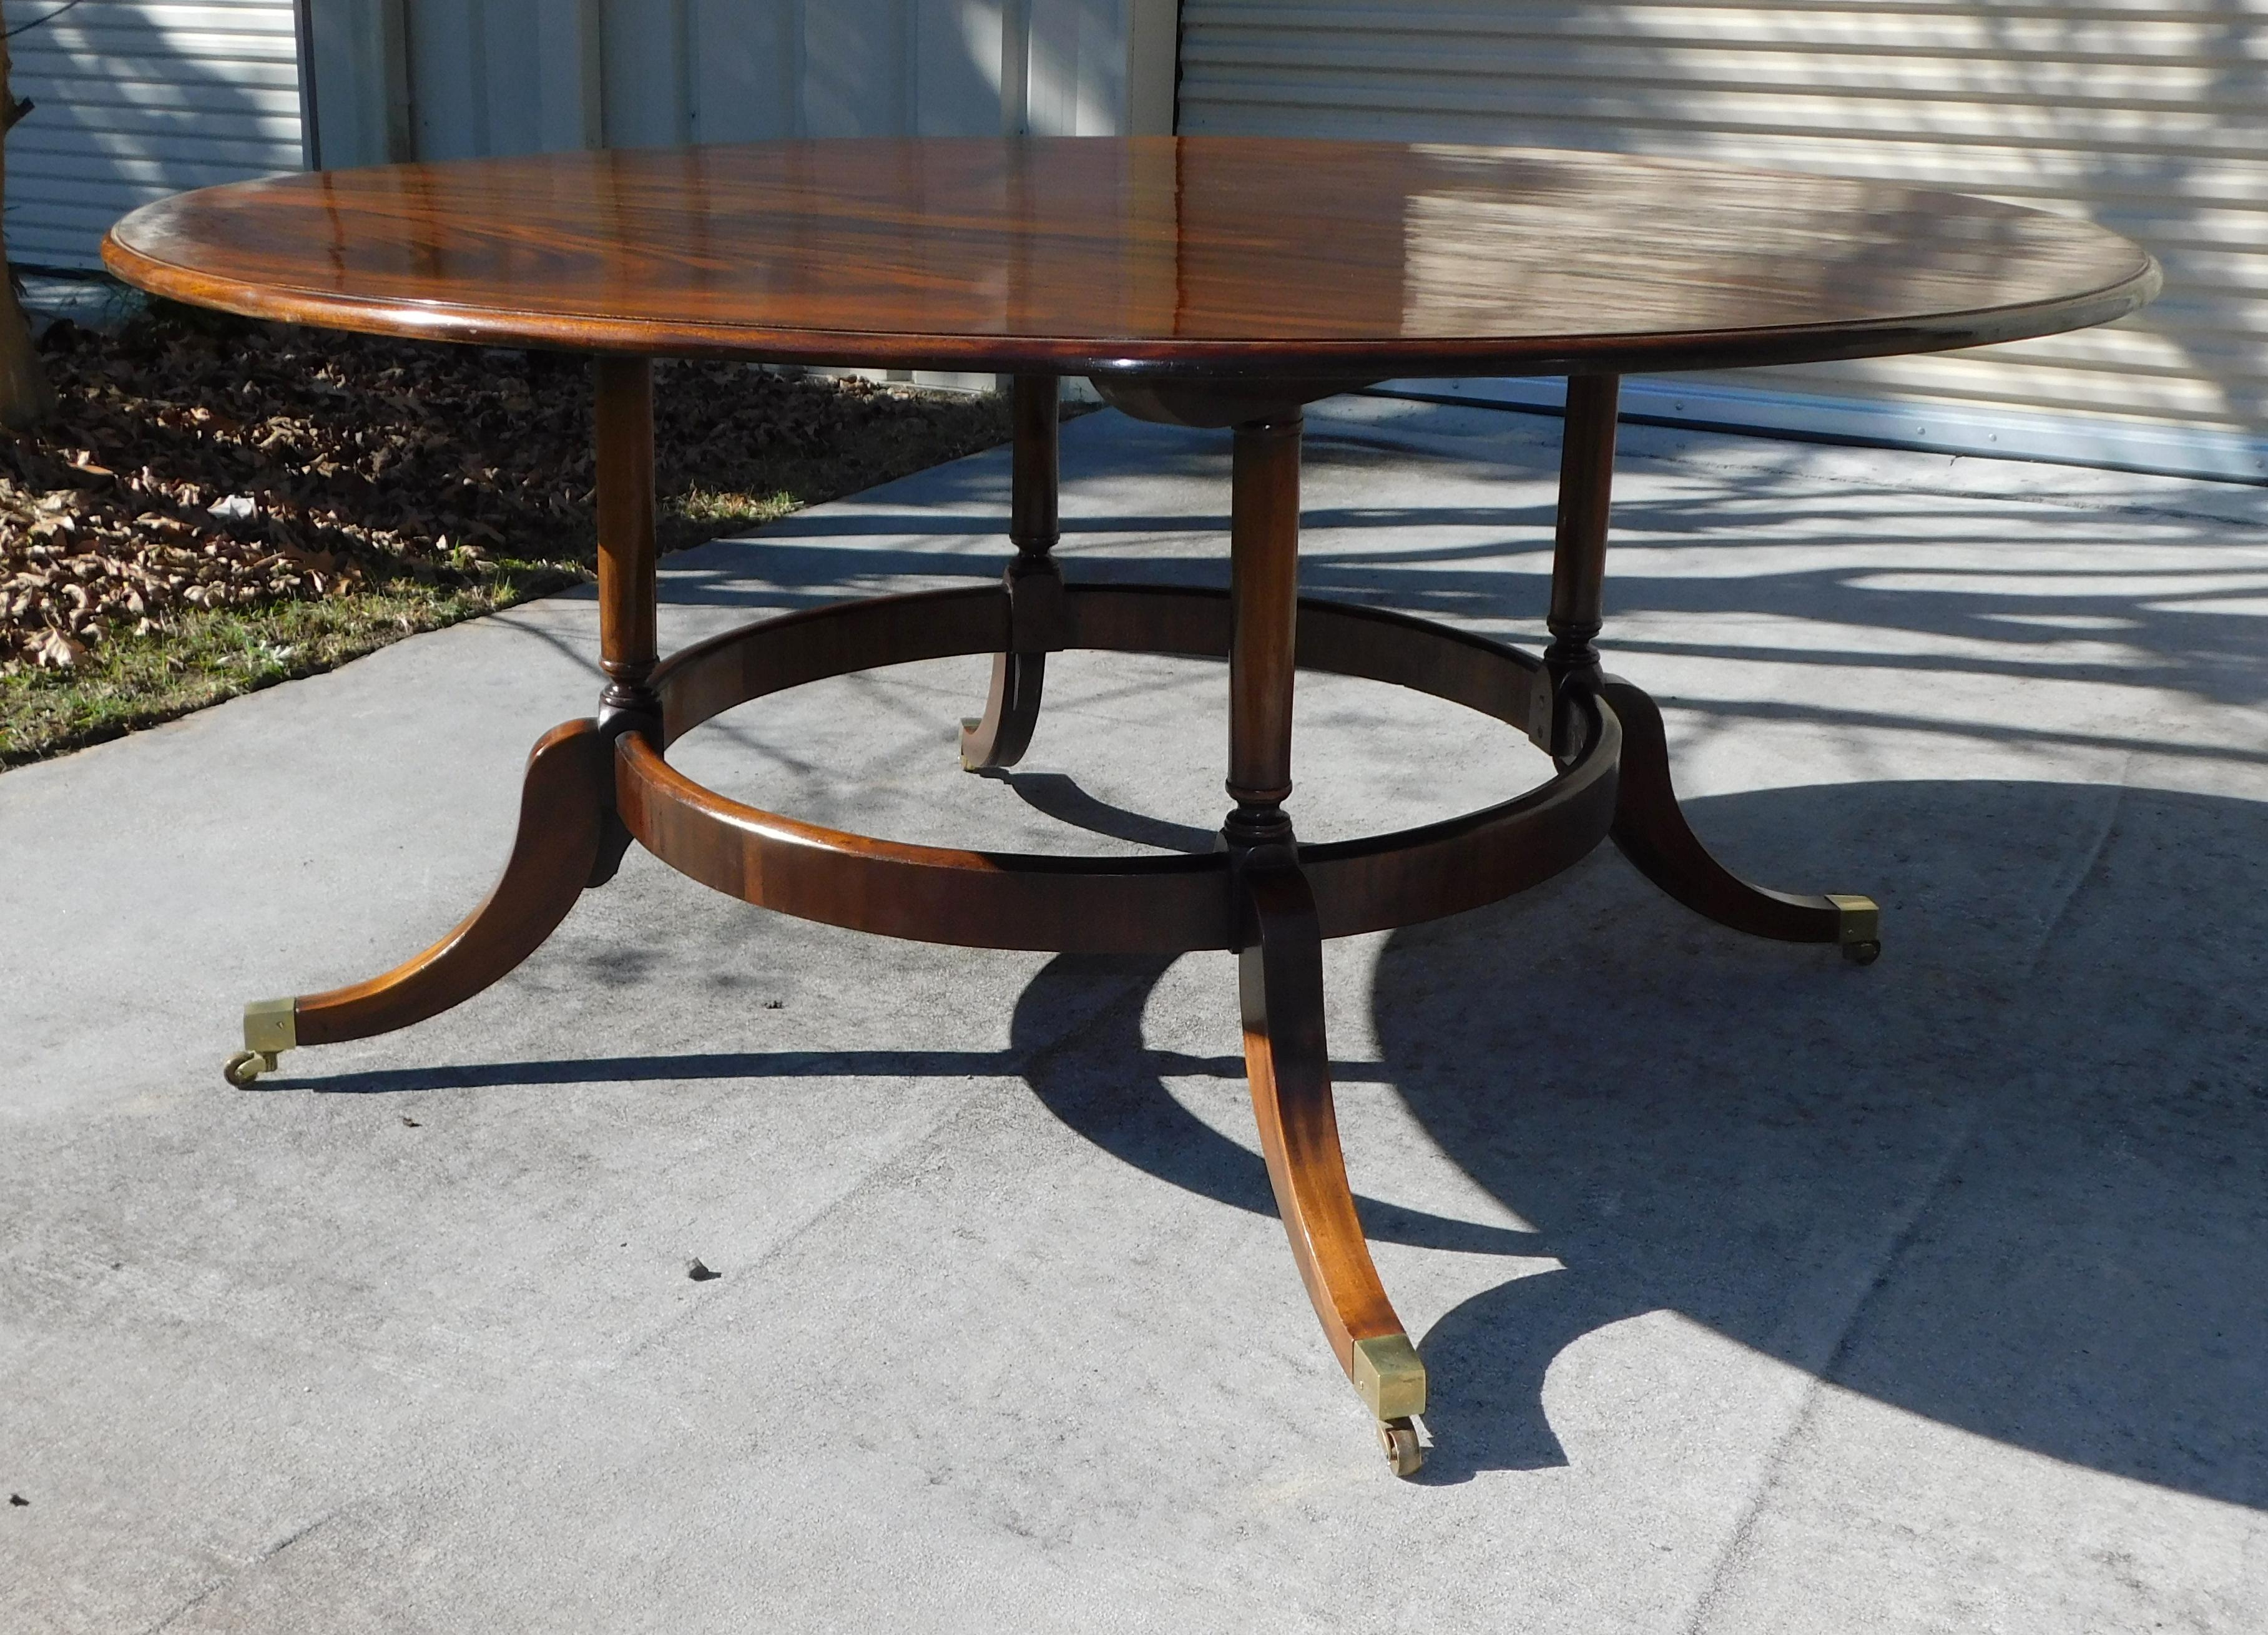 Mid-19th Century English Regency Mahogany Circular Dining Table with Splayed Legs on Casters 1850 For Sale